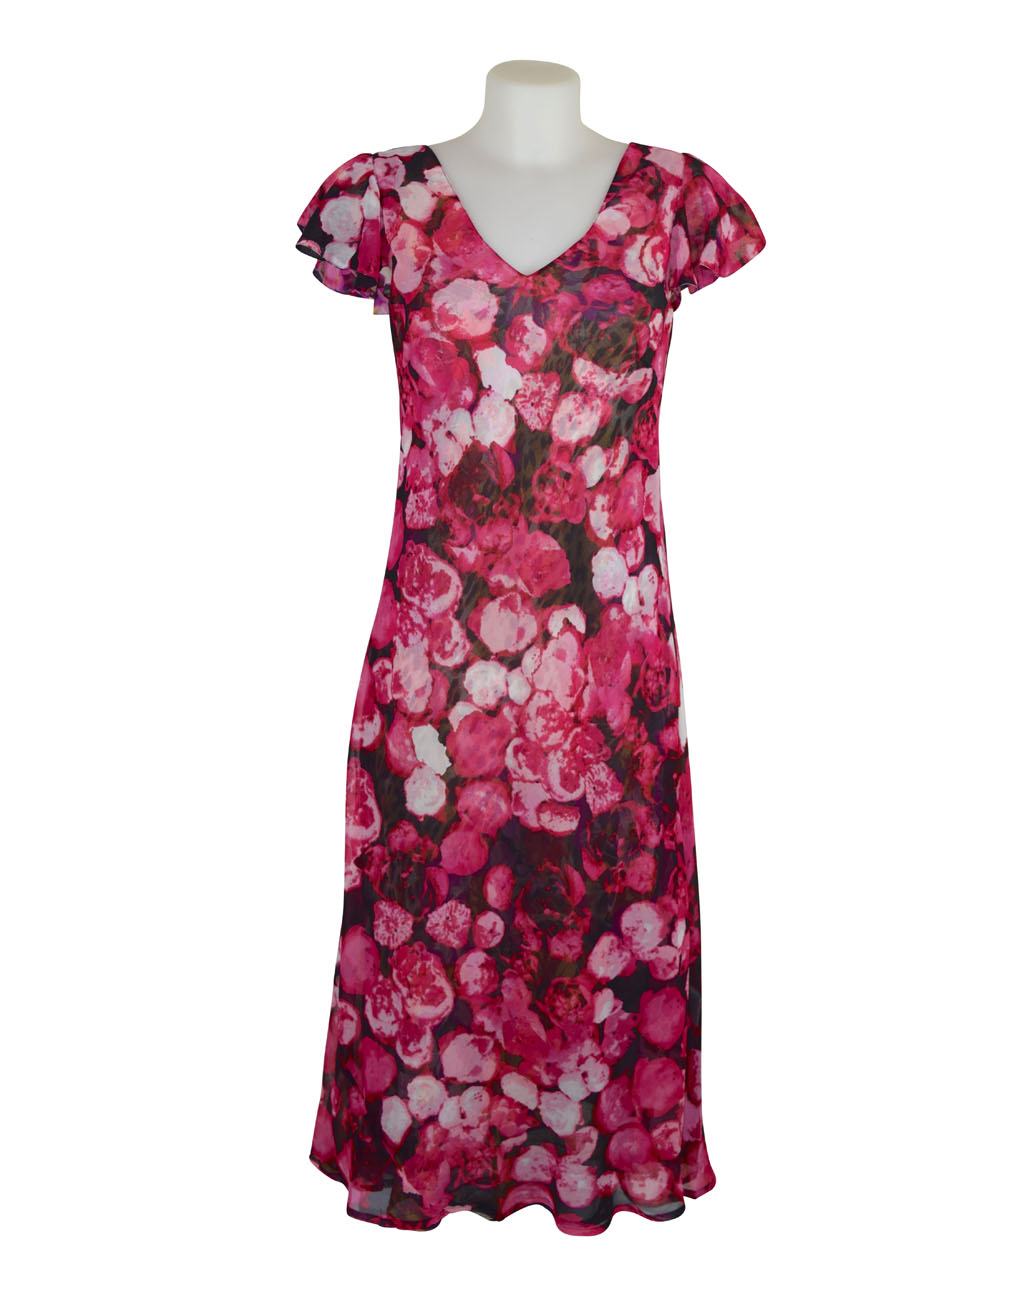 Paramour Reversible 2 In 1 Capped Sleeve Dress Pink Abstract / Leopard Floral A